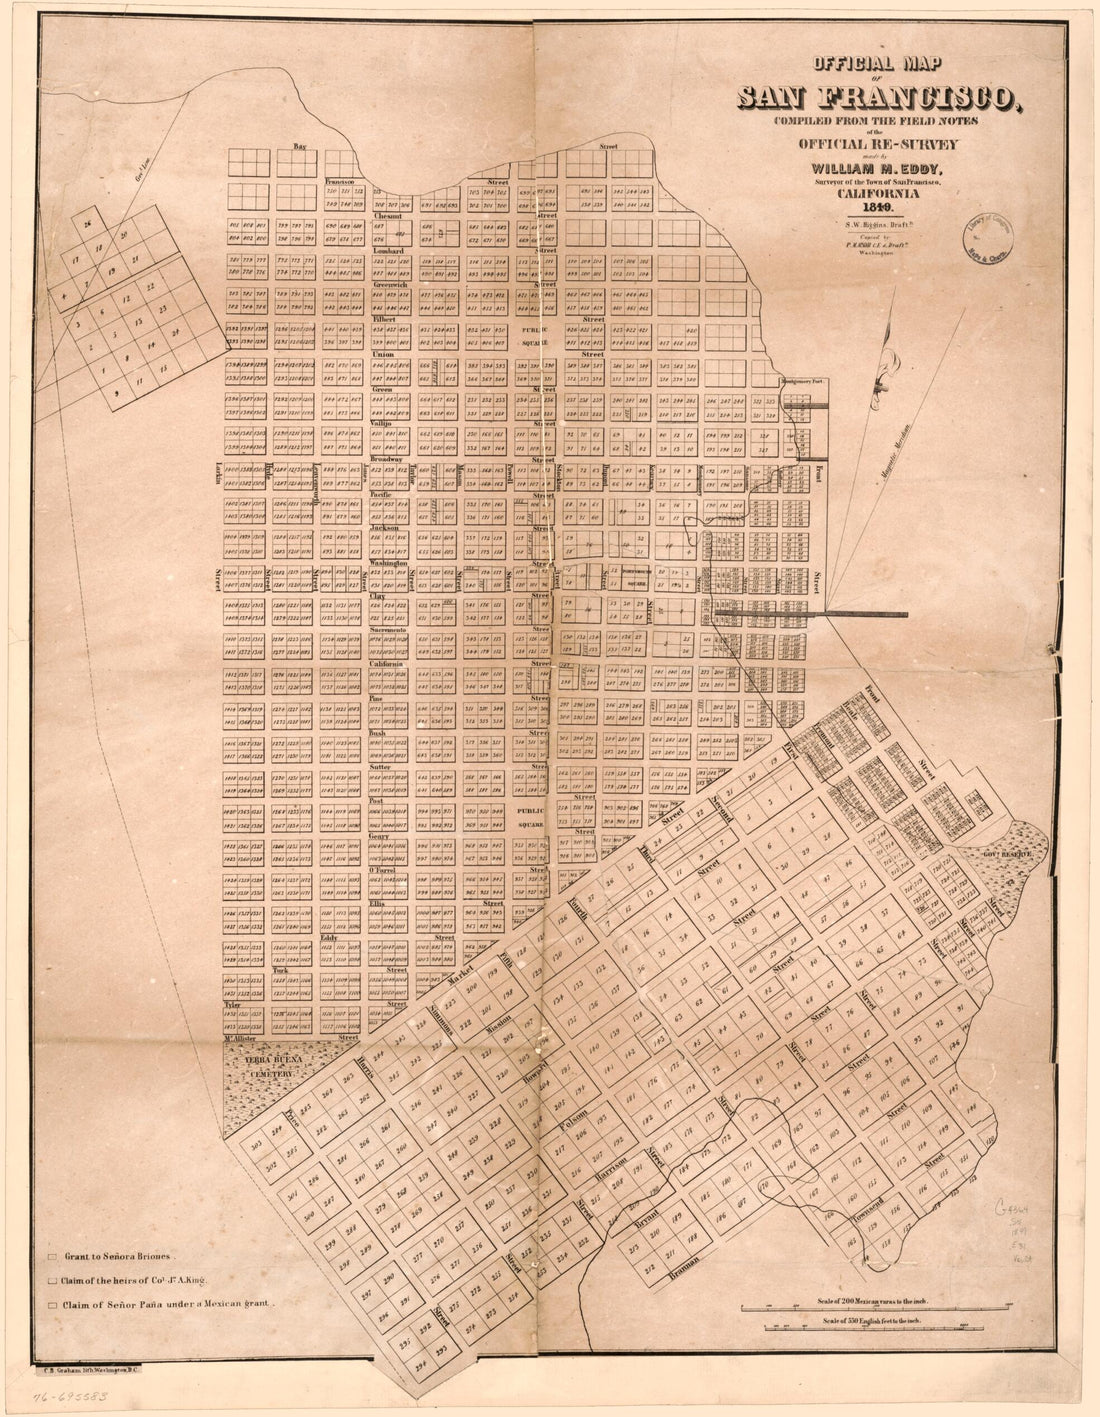 This old map of Survey Made by William M. Eddy, Surveyor of the Town of San Francisco, California from 1849 was created by William M. Eddy, C. B. (Curtis B.) Graham, Sylvester W. Higgins in 1849